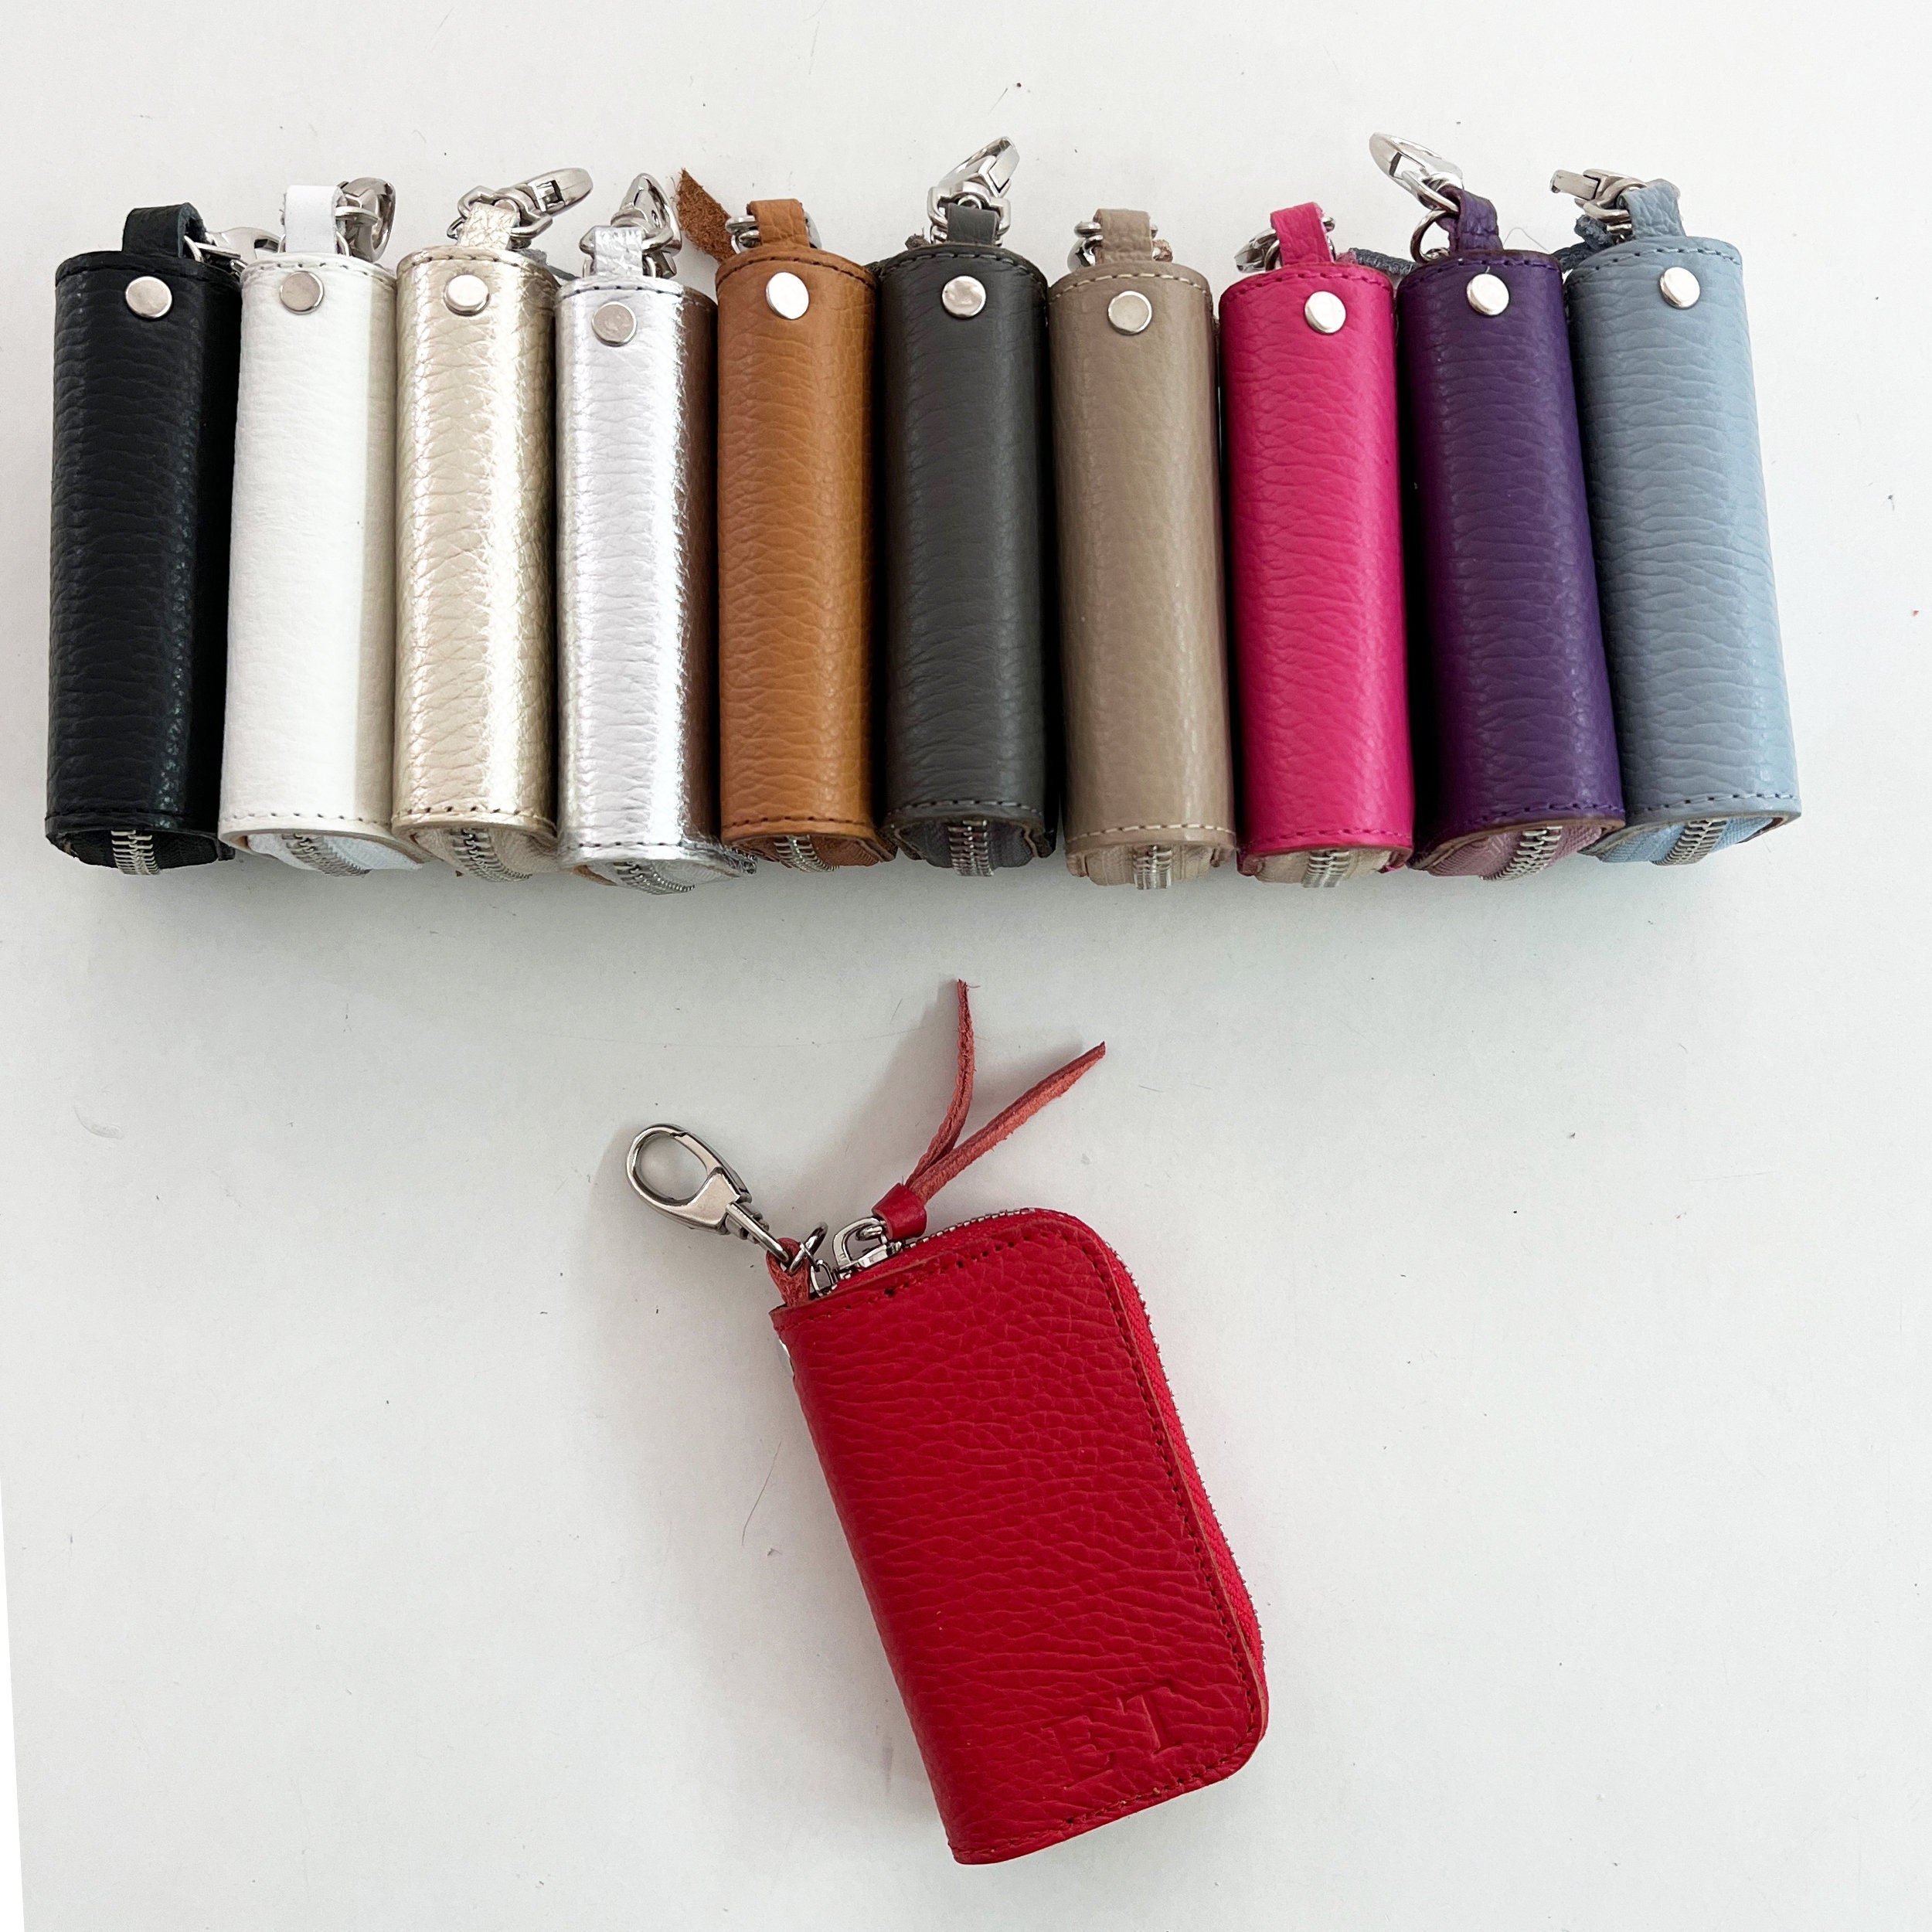 Tanmivvy Key Case Leather Key Holder Keychain Key Pouch Waist Hanging Key  Protector, Key Organizer, With 6 Key Fob Hooks and A Removable Key Ring